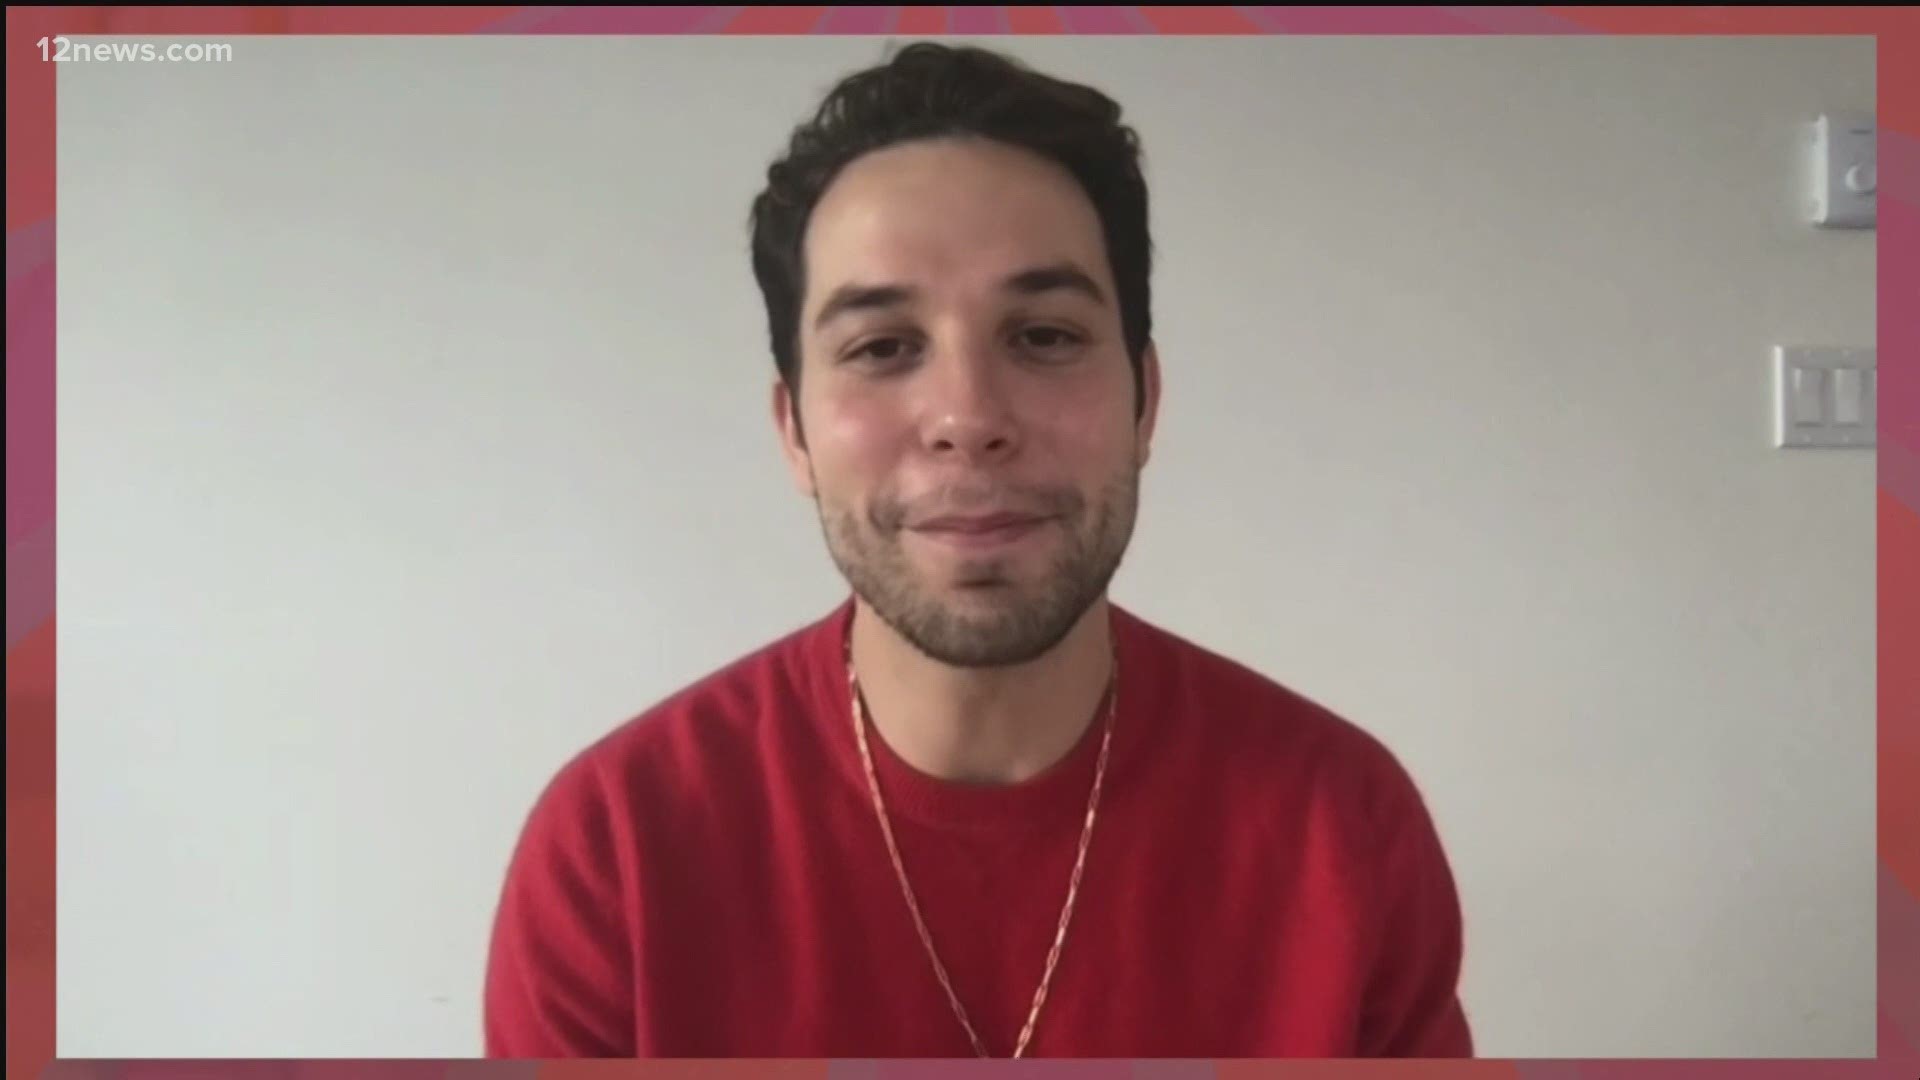 The new NBC show will have everyone singing a tune. Skylar Astin is giving an inside look at the new episodes.